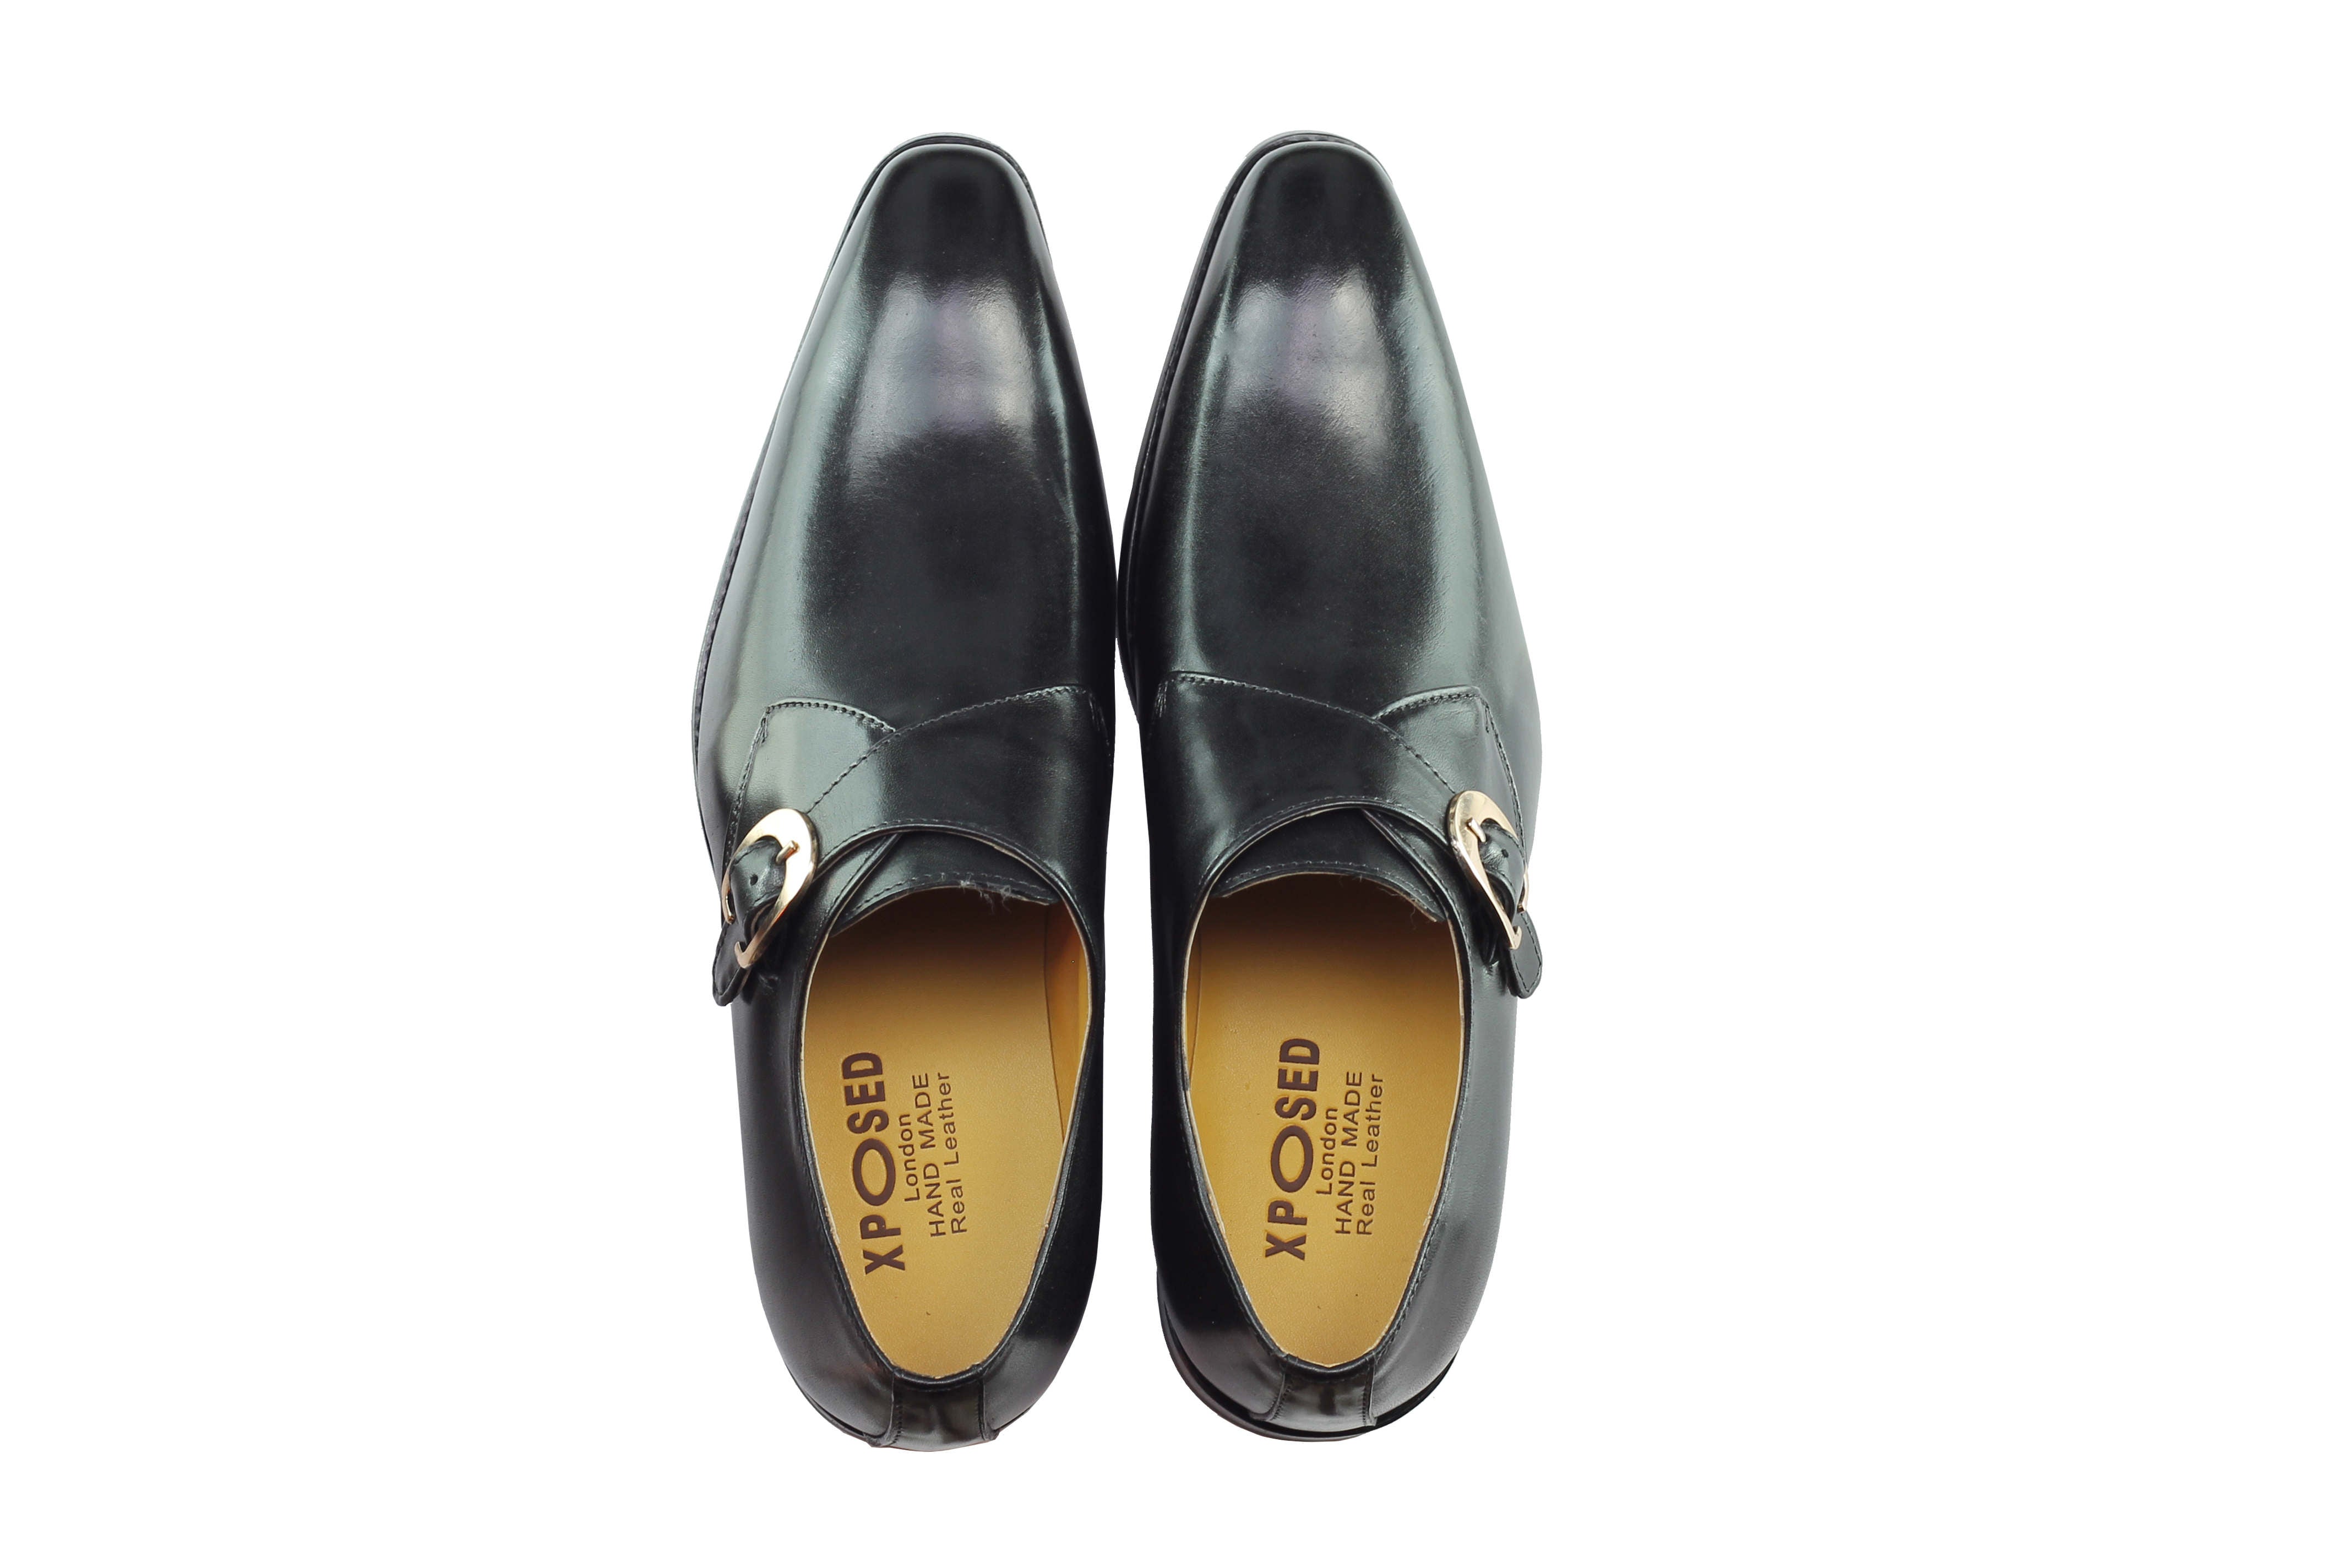 Black Monk Strap Real Leather Shoes